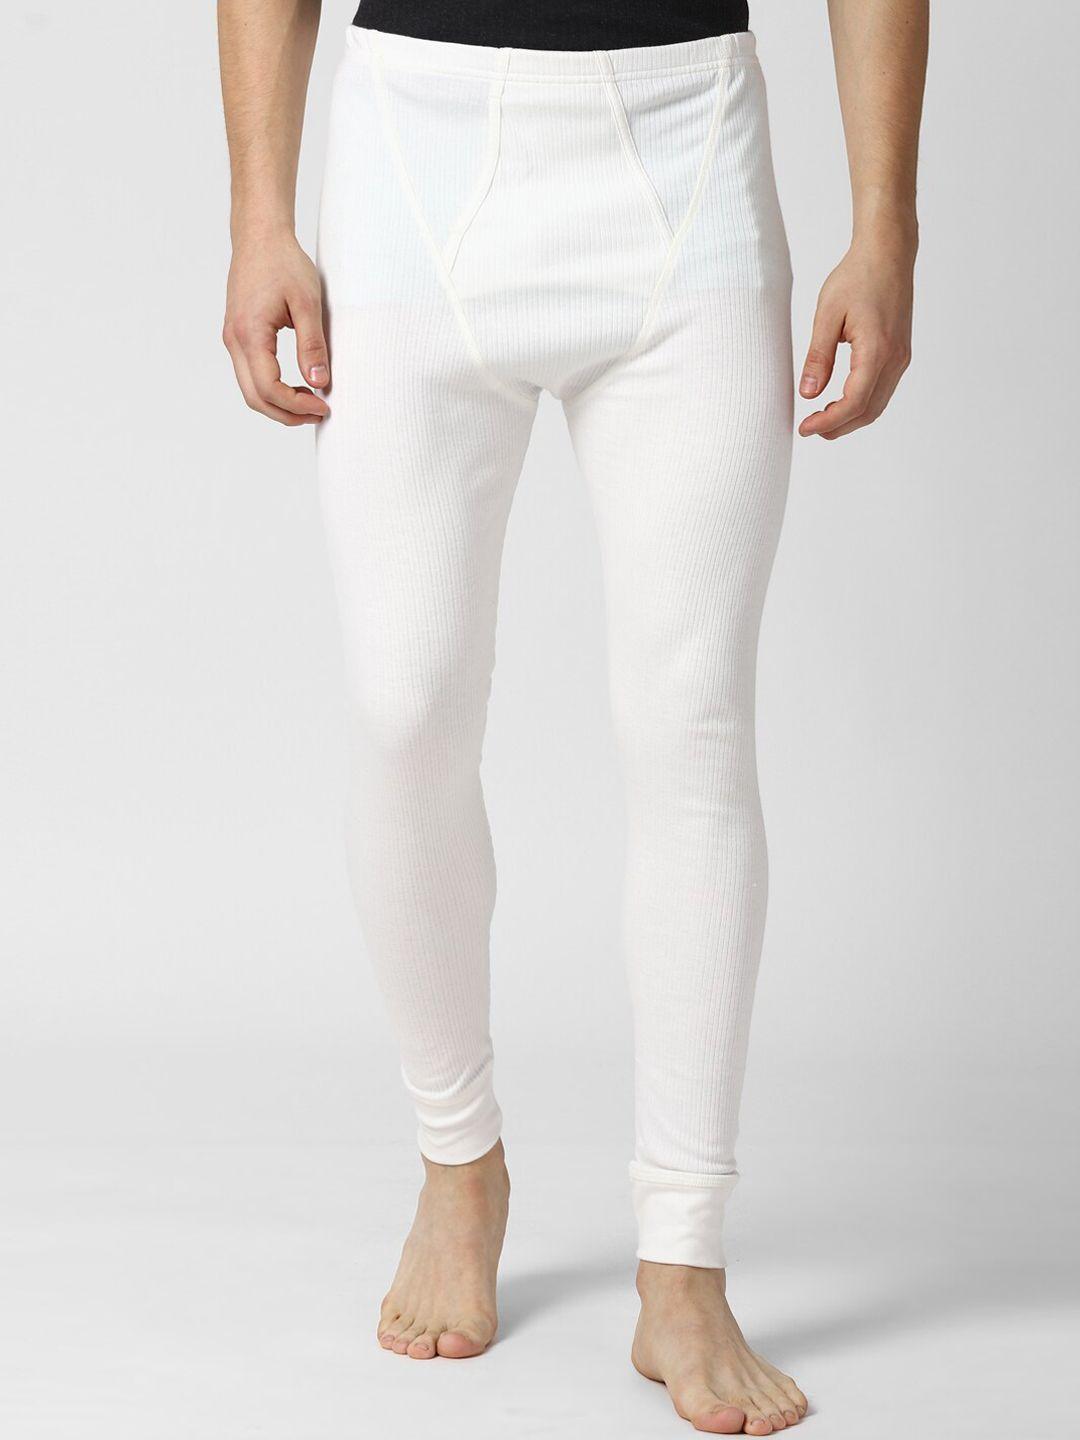 peter-england-men-white-solid-thermal-pants